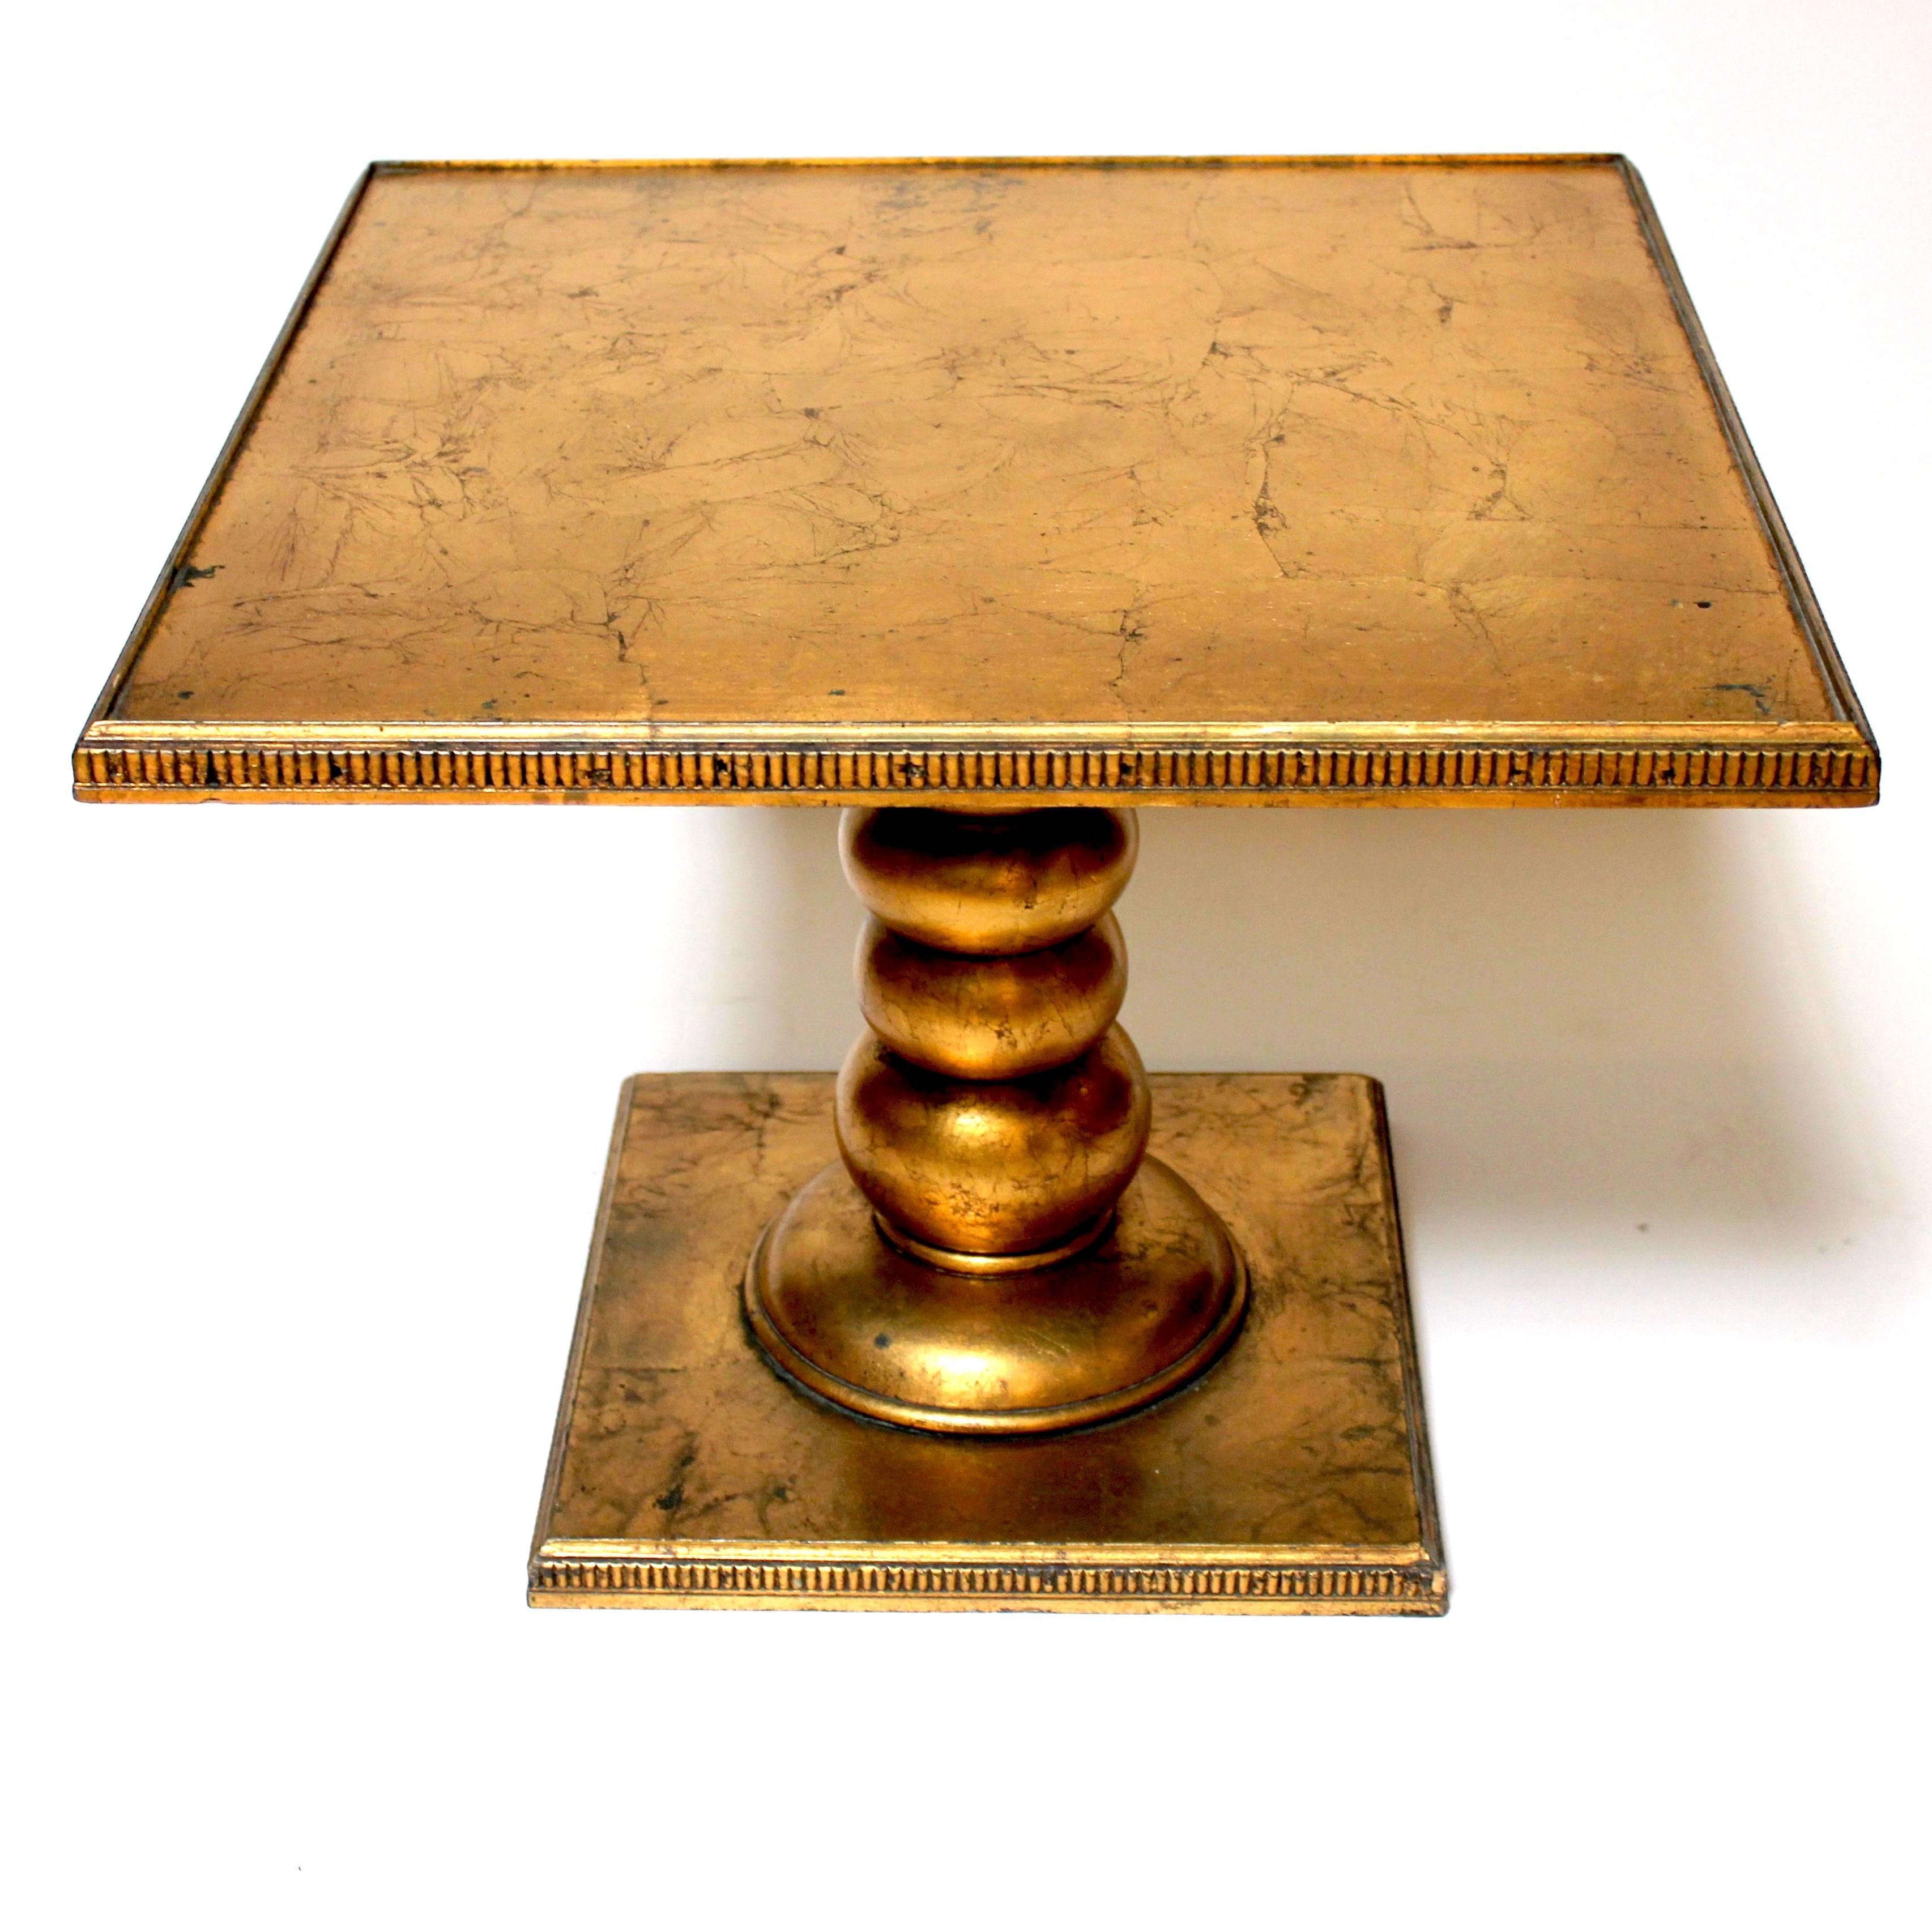 Vintage Hollywood Regency gold leaf end table. A Classic and elegant design, with a beautiful gold luster. The table includes a glass panel, not pictured, to protect the tabletop.